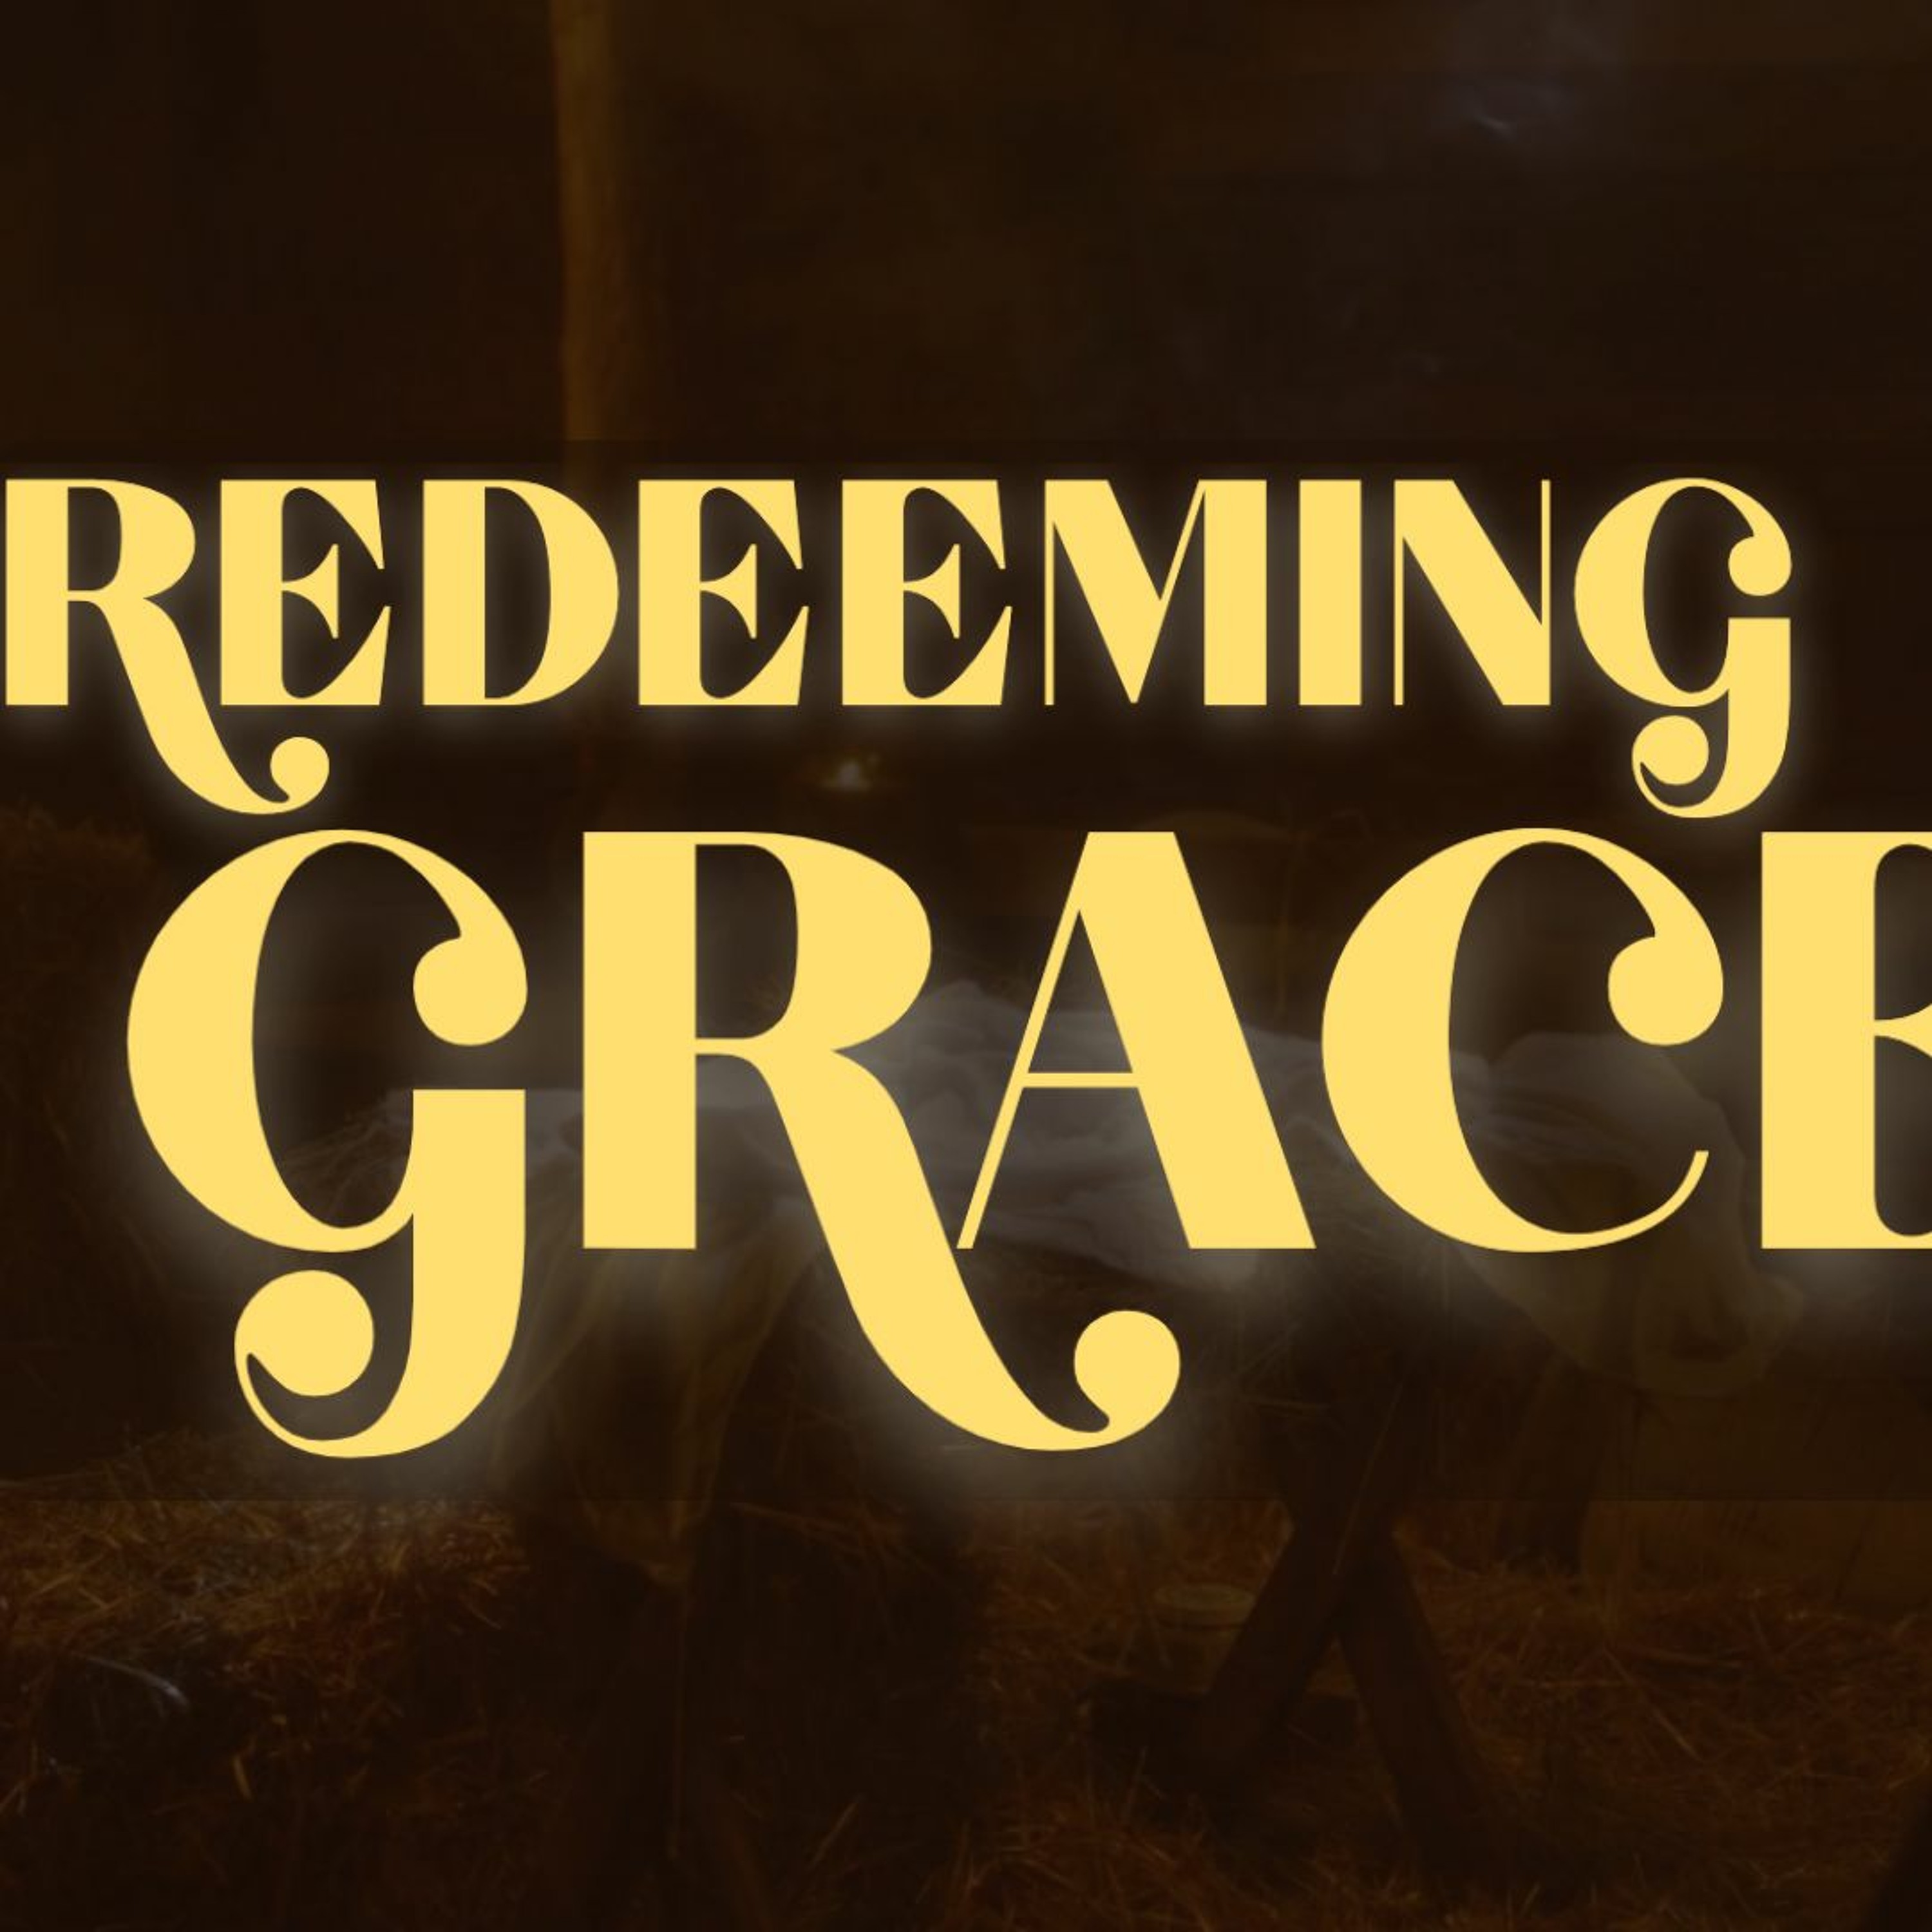 Don't Tell Me What To Do! :: Redeeming Grace Pt. 1